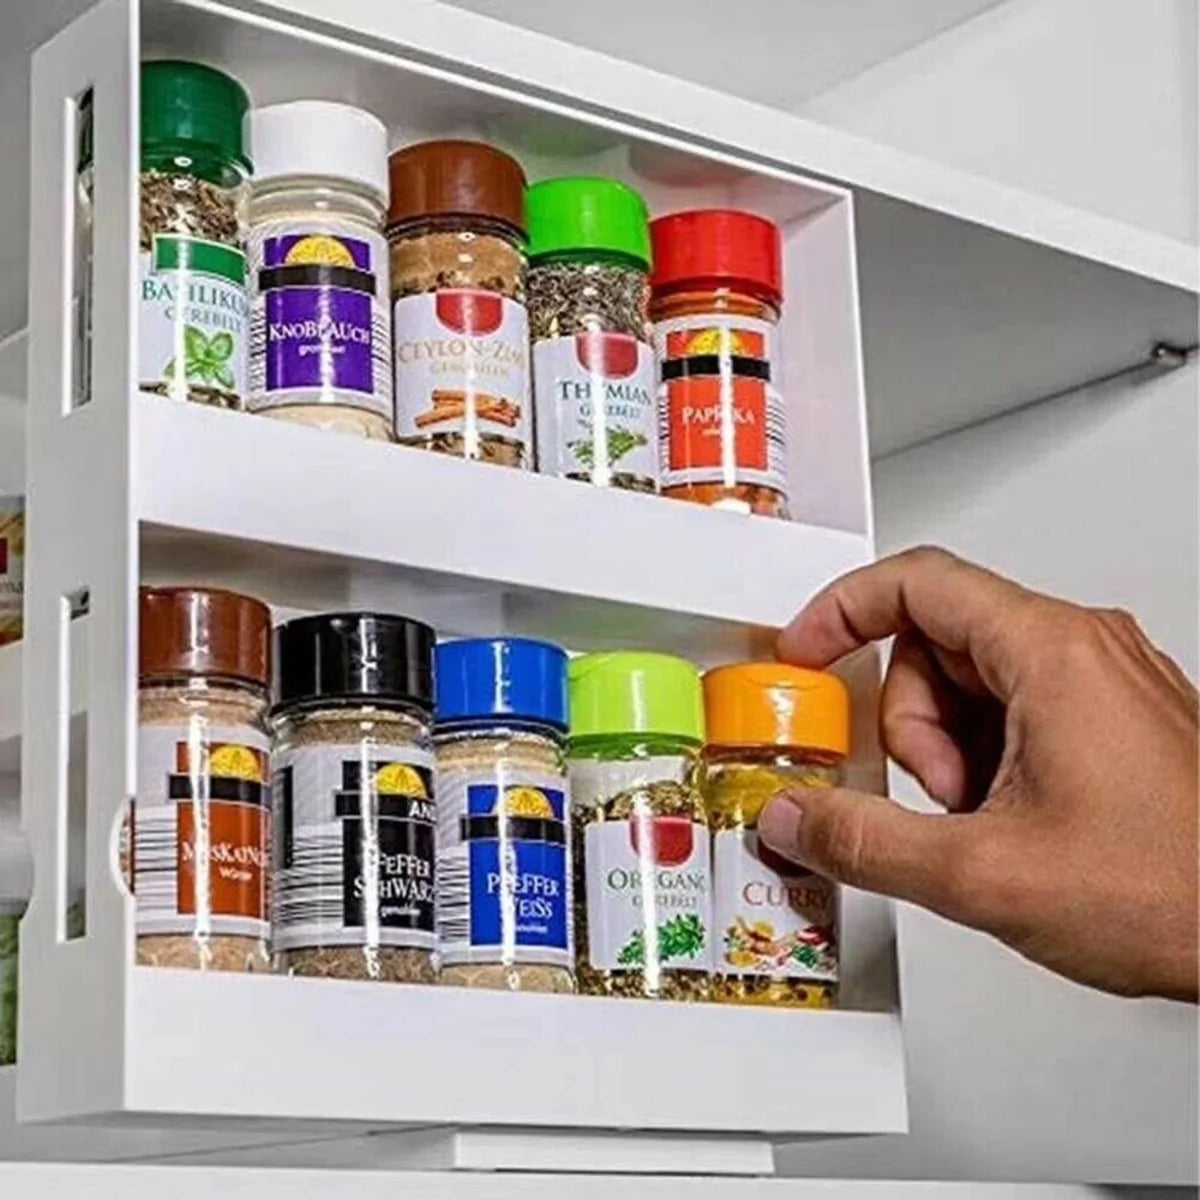 Precise: Double Layer Rotating Kitchen Spice Organizer Rack